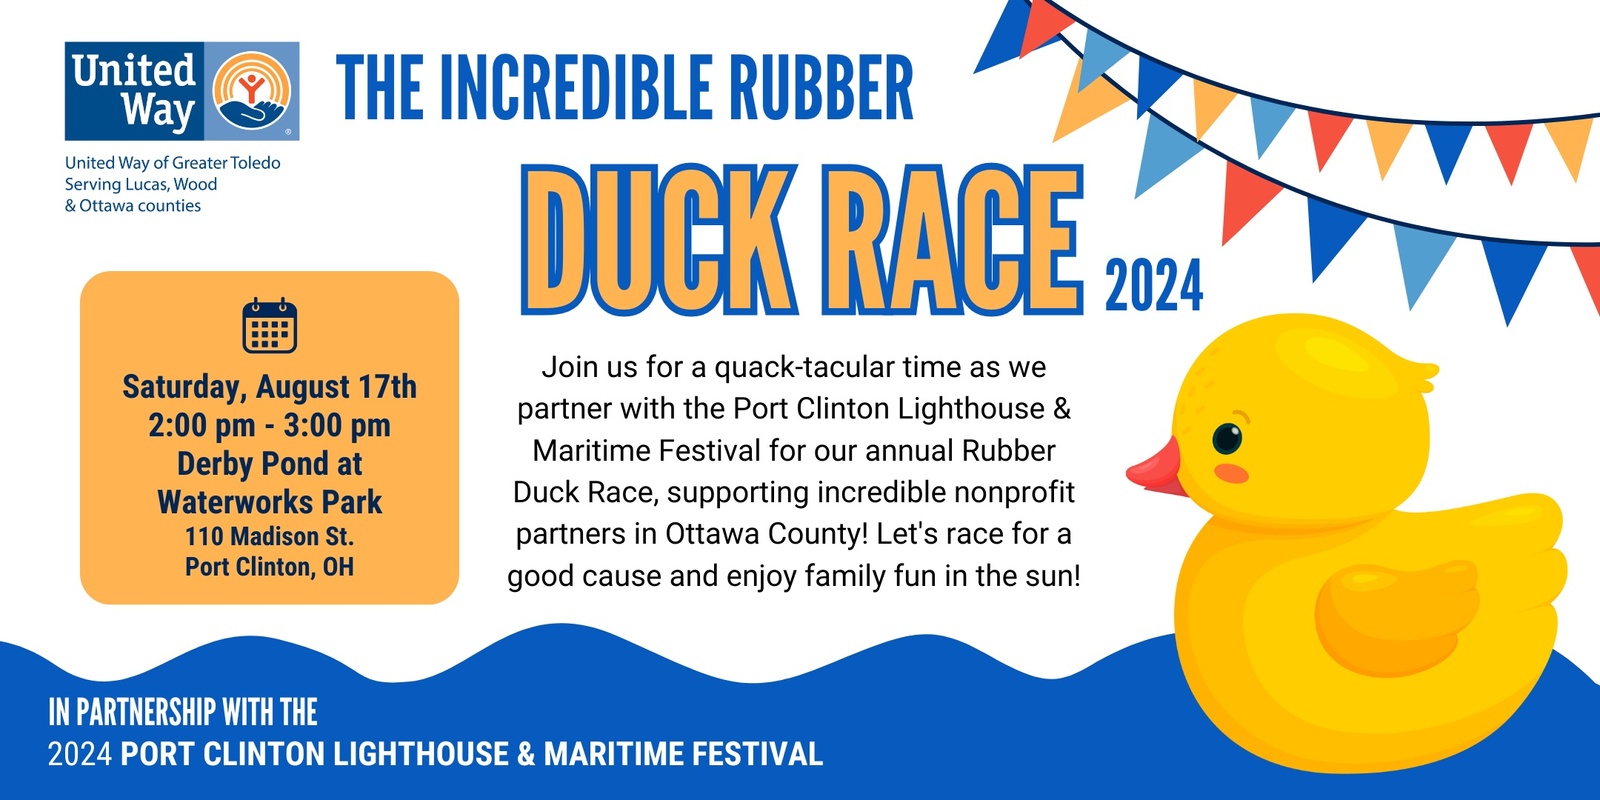 Banner image for The Incredible Rubber Duck Race 2024